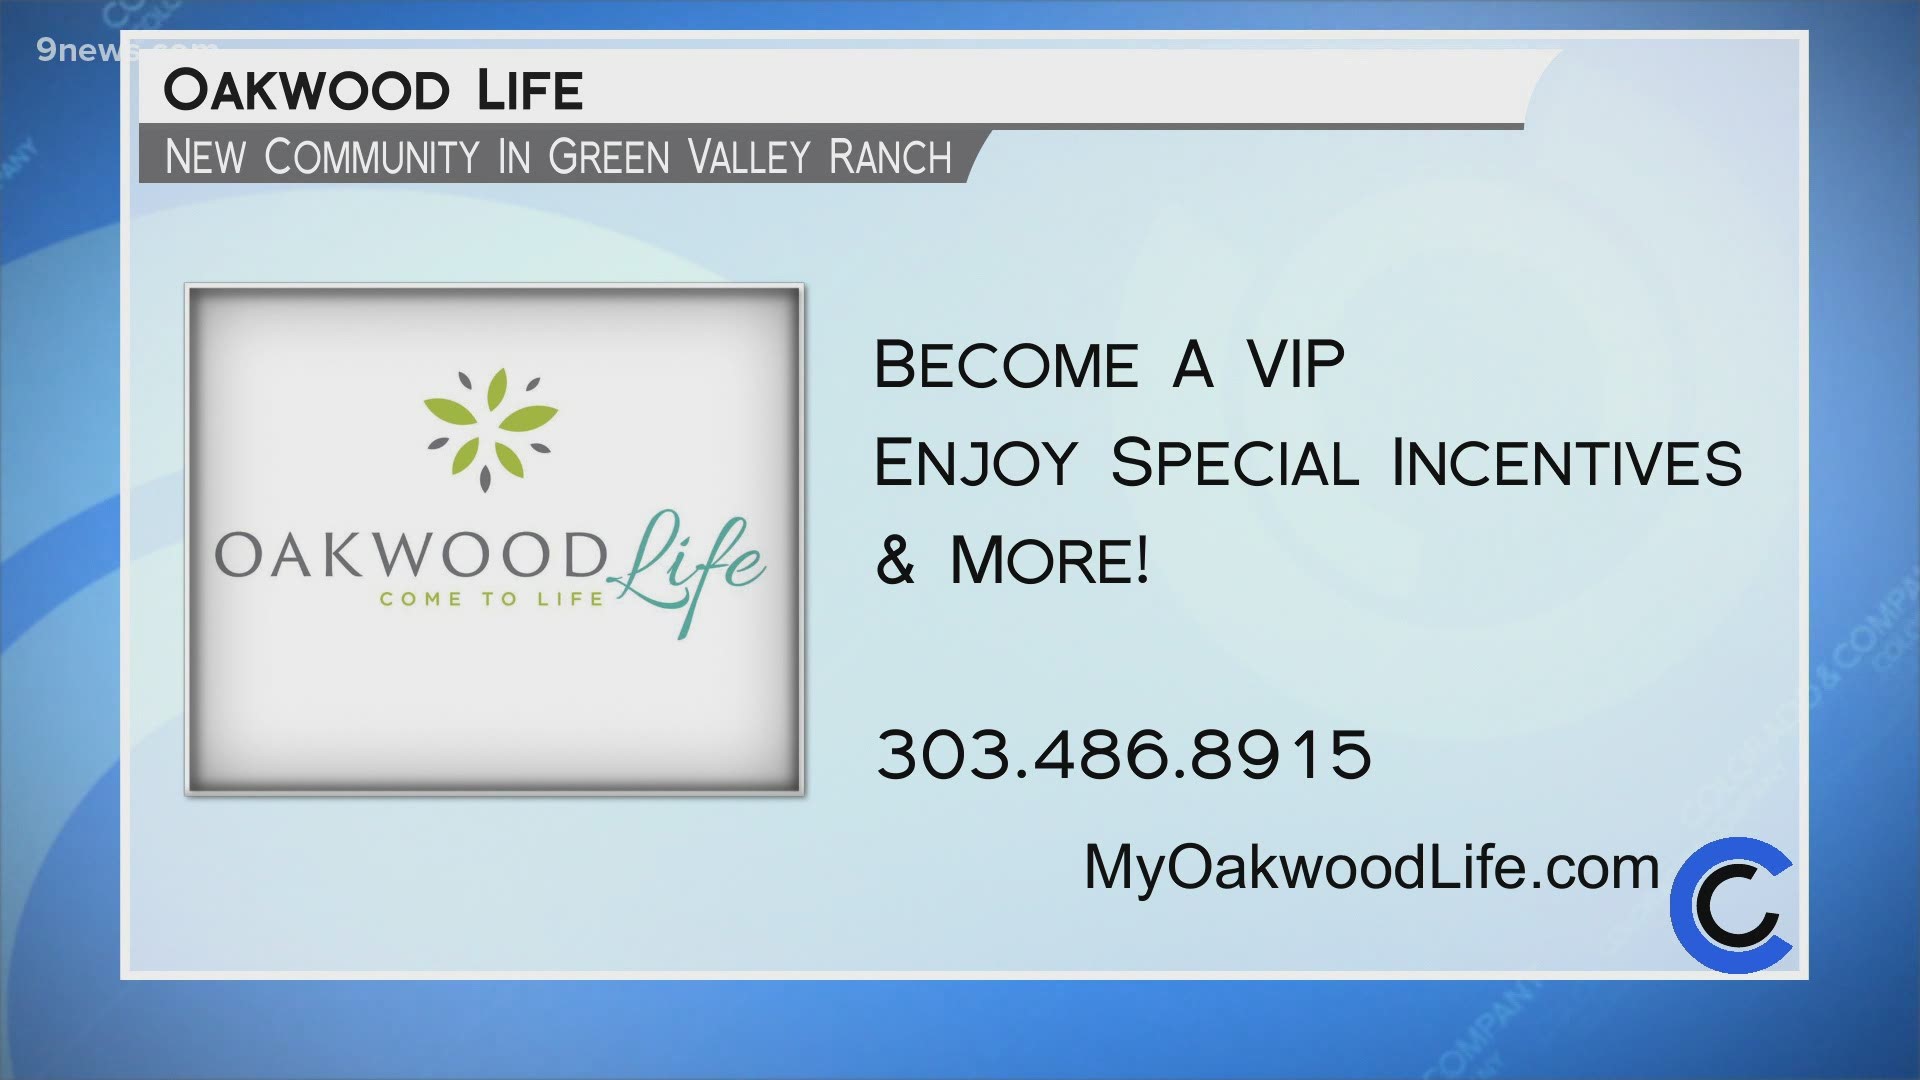 Check out the exciting floor plans and amenities that come with your new Oakwood Life. Learn more online at MyOakwoodLife.com or call 303.486.8915.